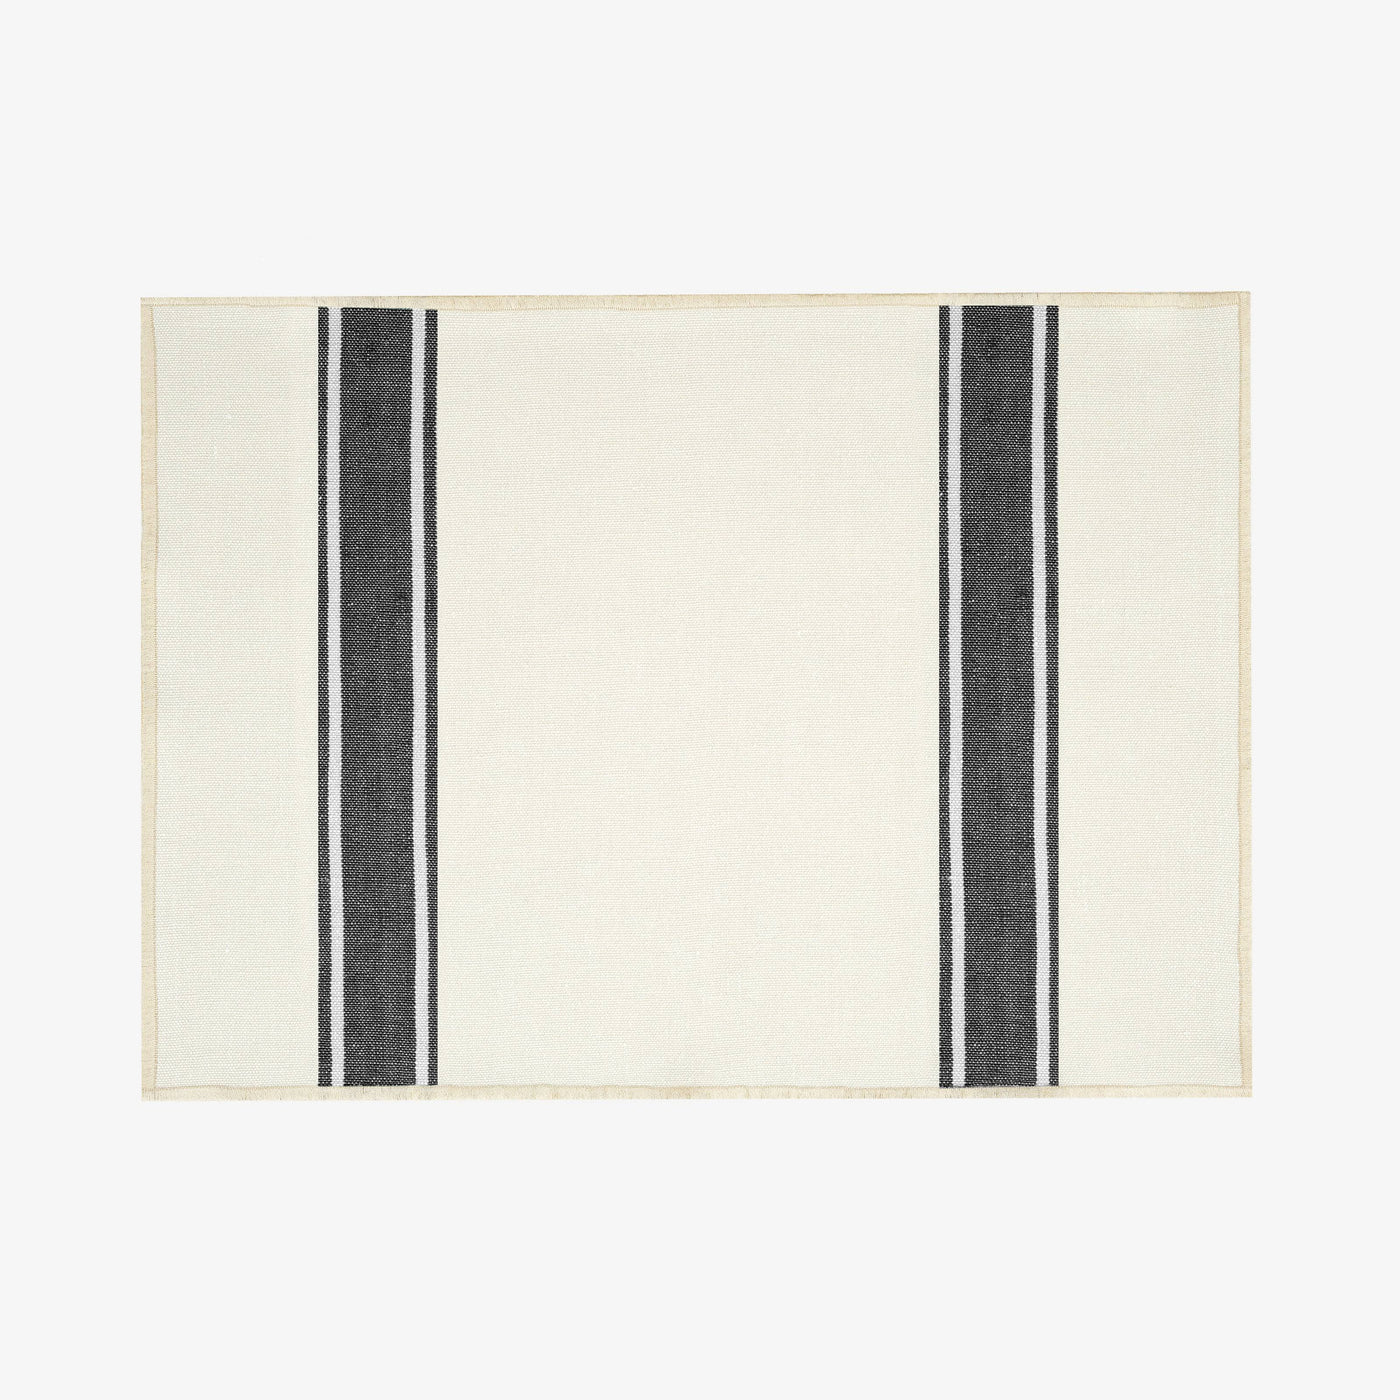 Mary Set of 2 Striped Placemats, Natural - Black Placemats sazy.com